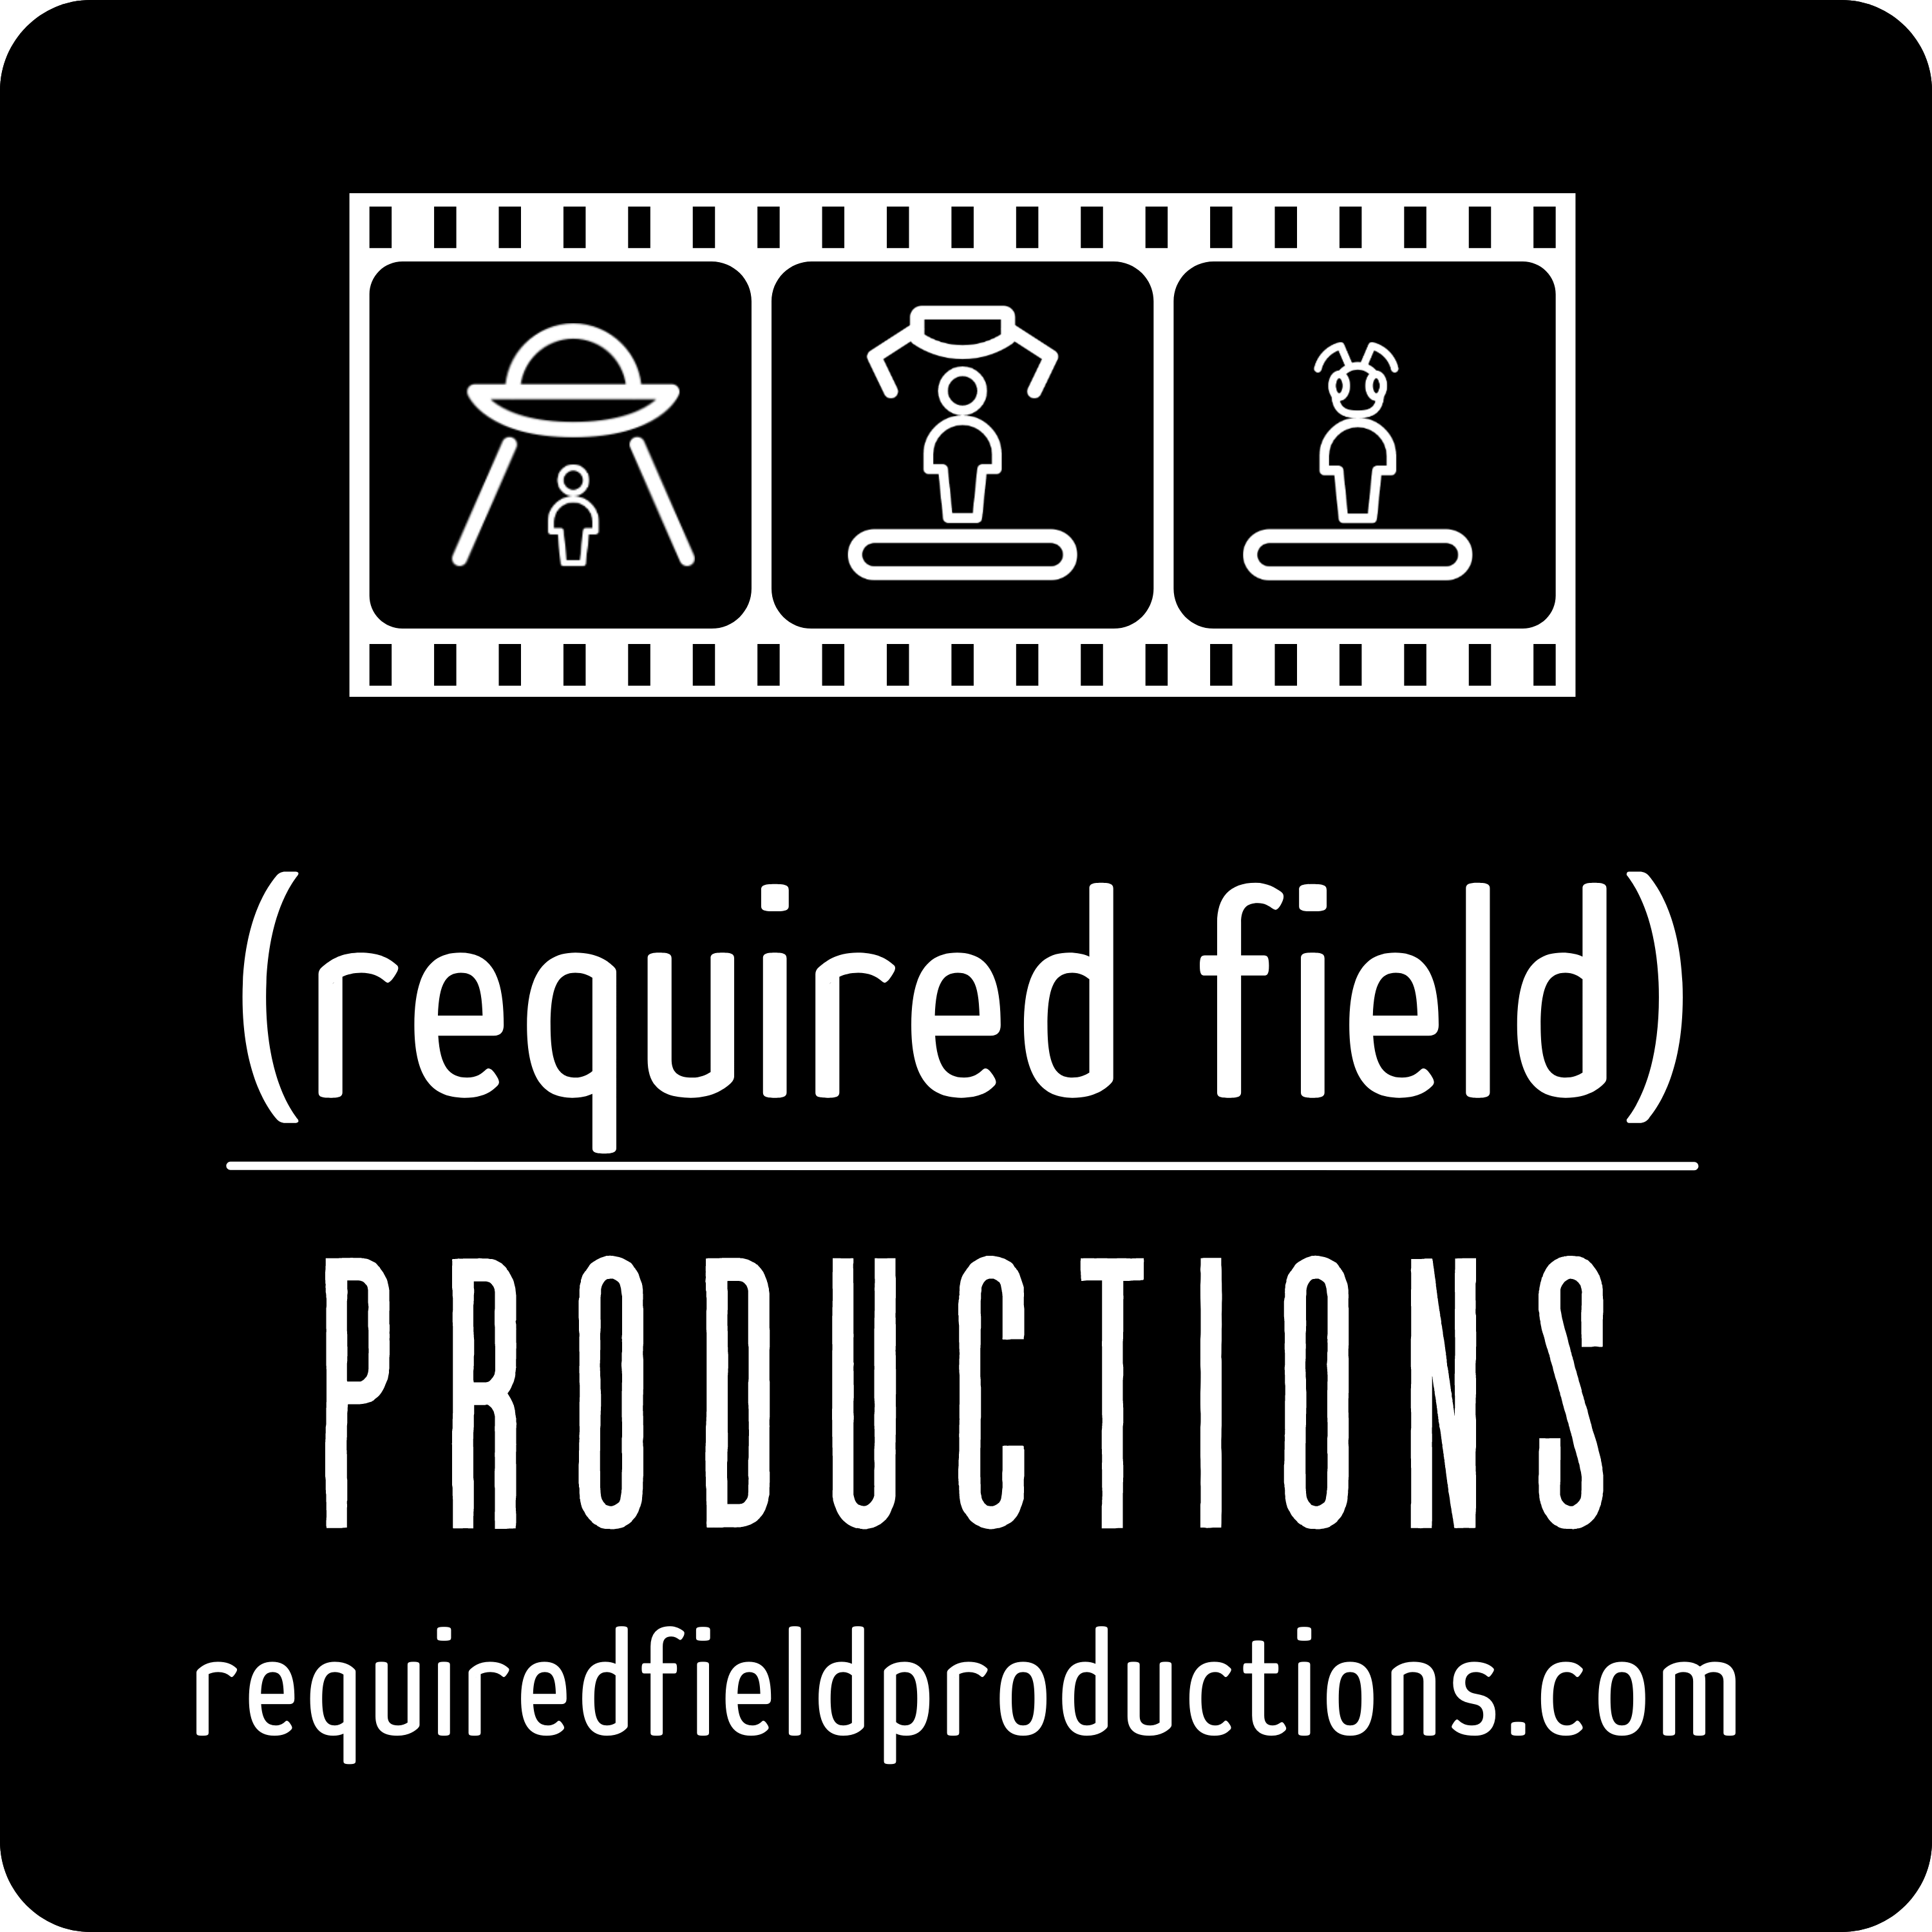 requiredfieldproductions